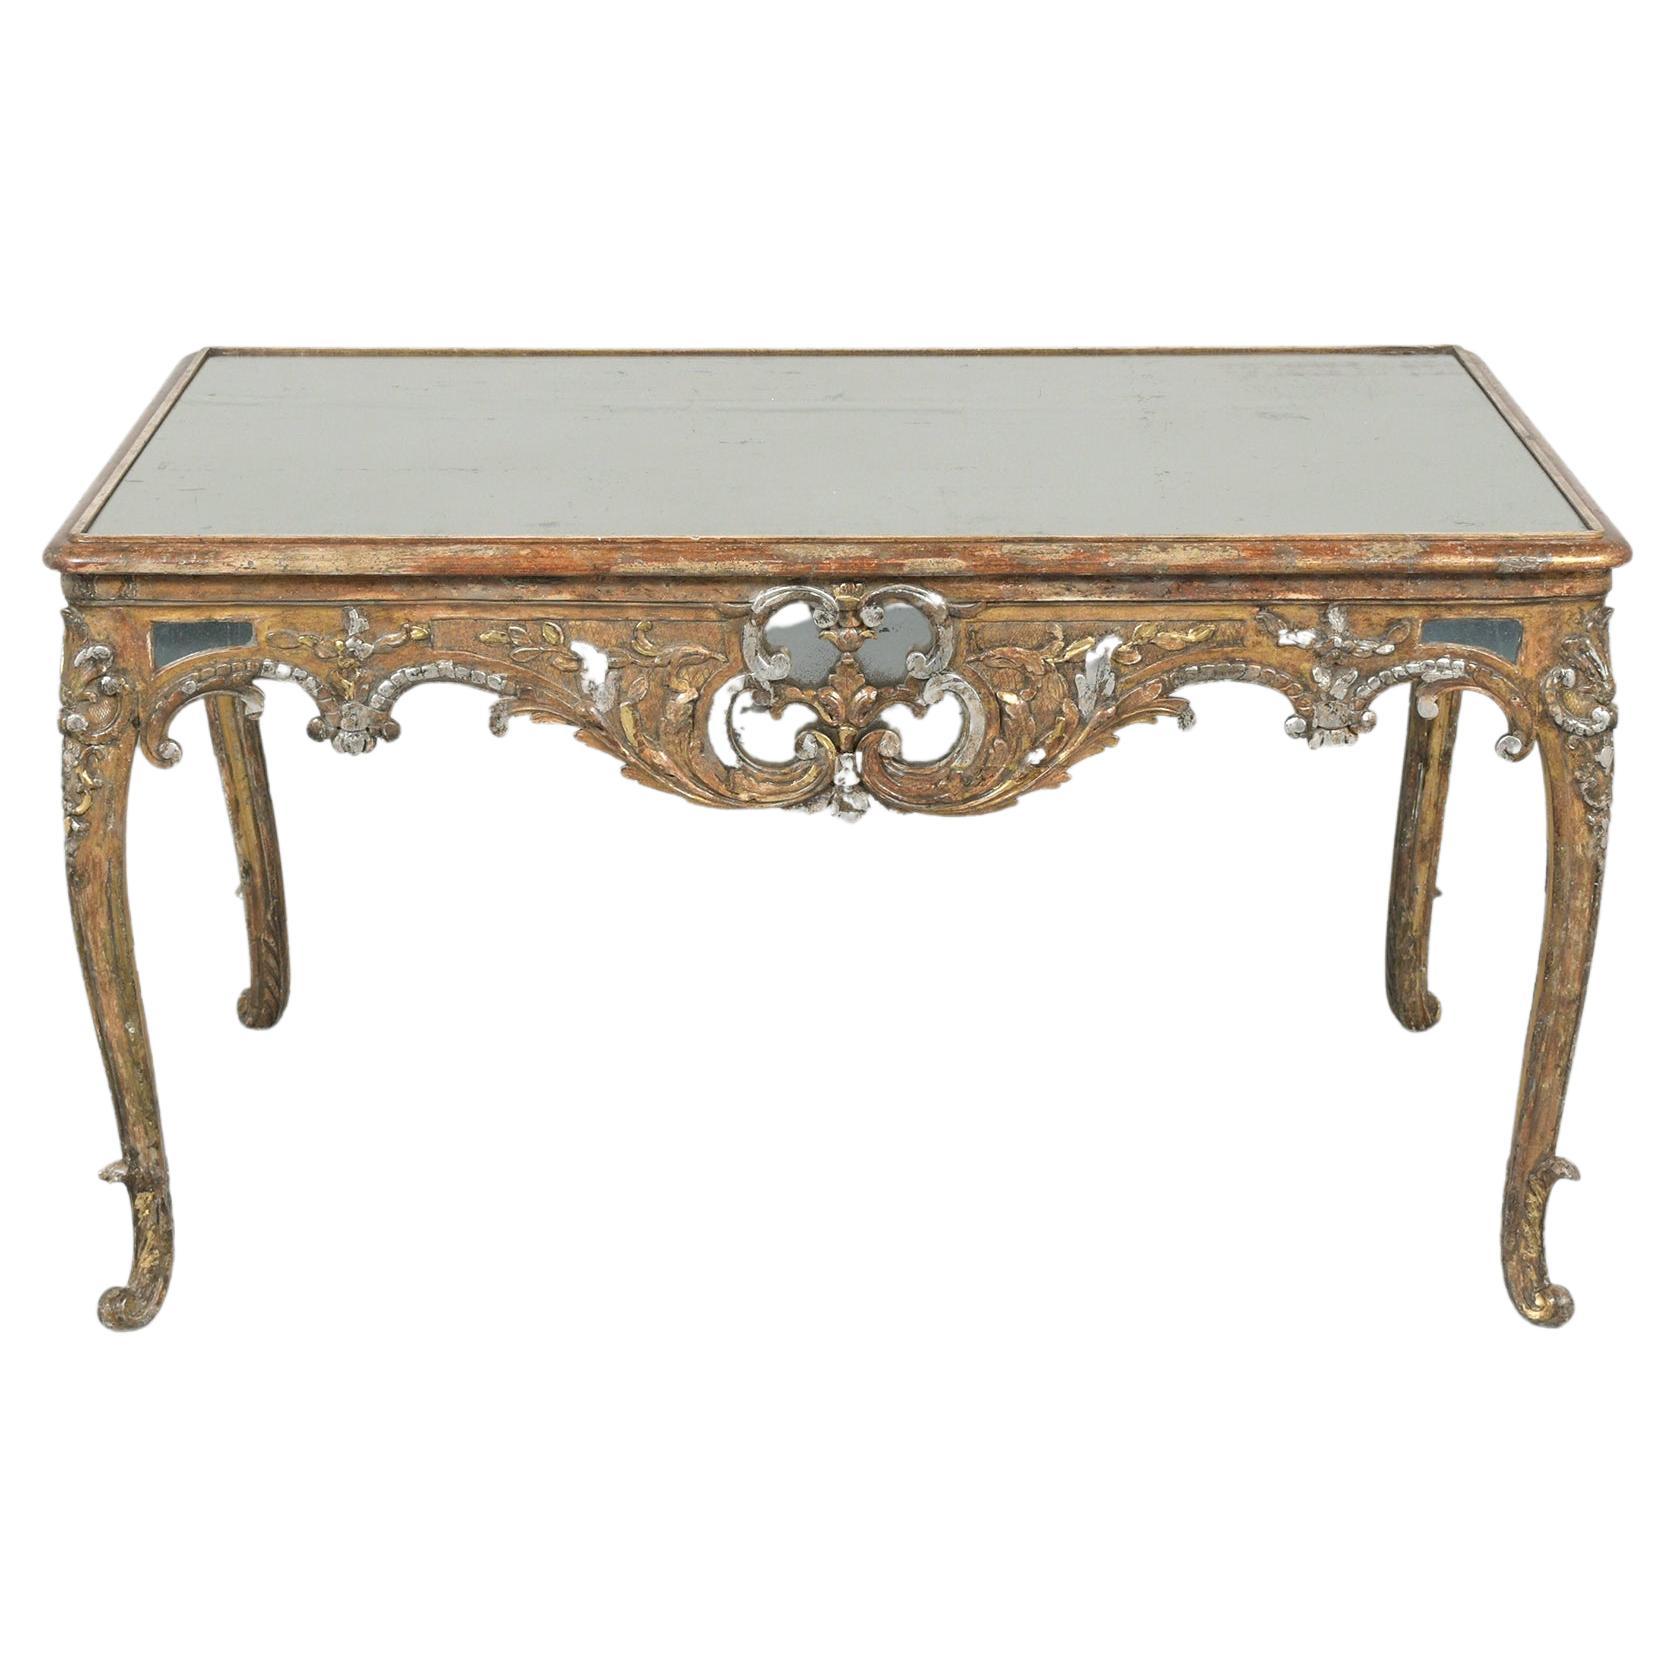 1830s Louis XVI Giltwood Center Table with Vintage Mirrored Top For Sale